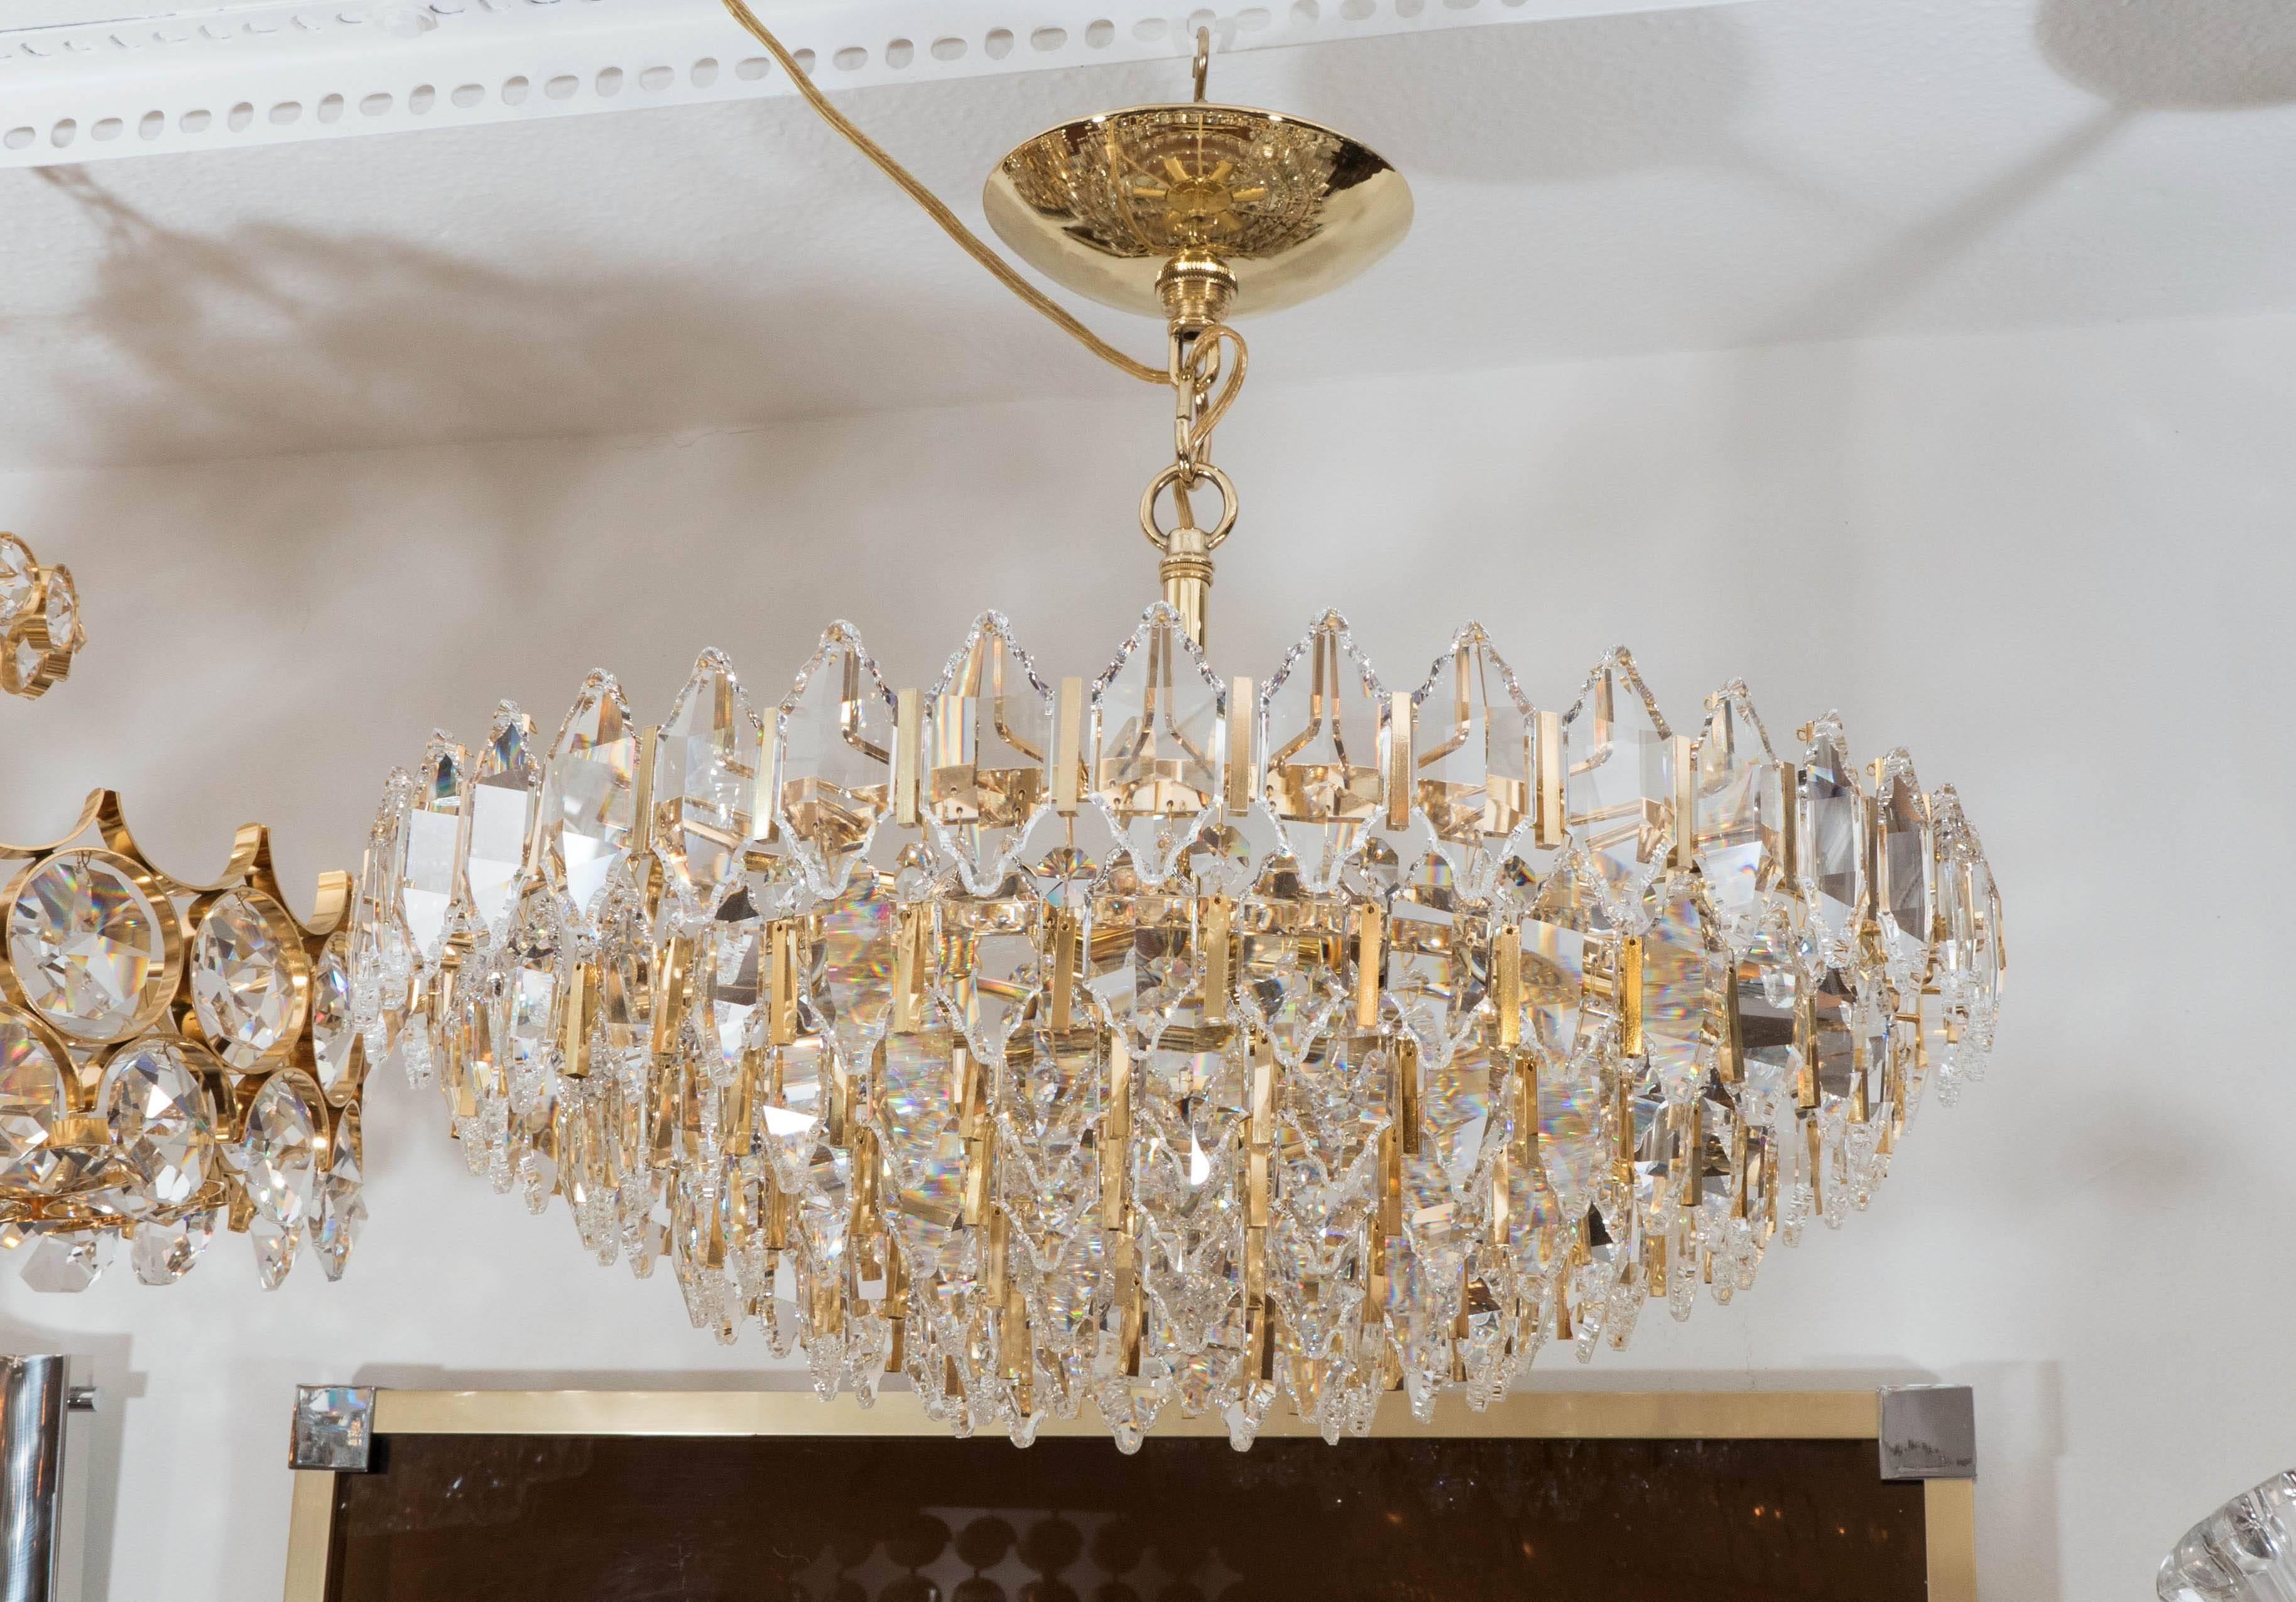 Tiered brass chandelier featuring suspended diamond-shaped, facet-cut crystal elements.